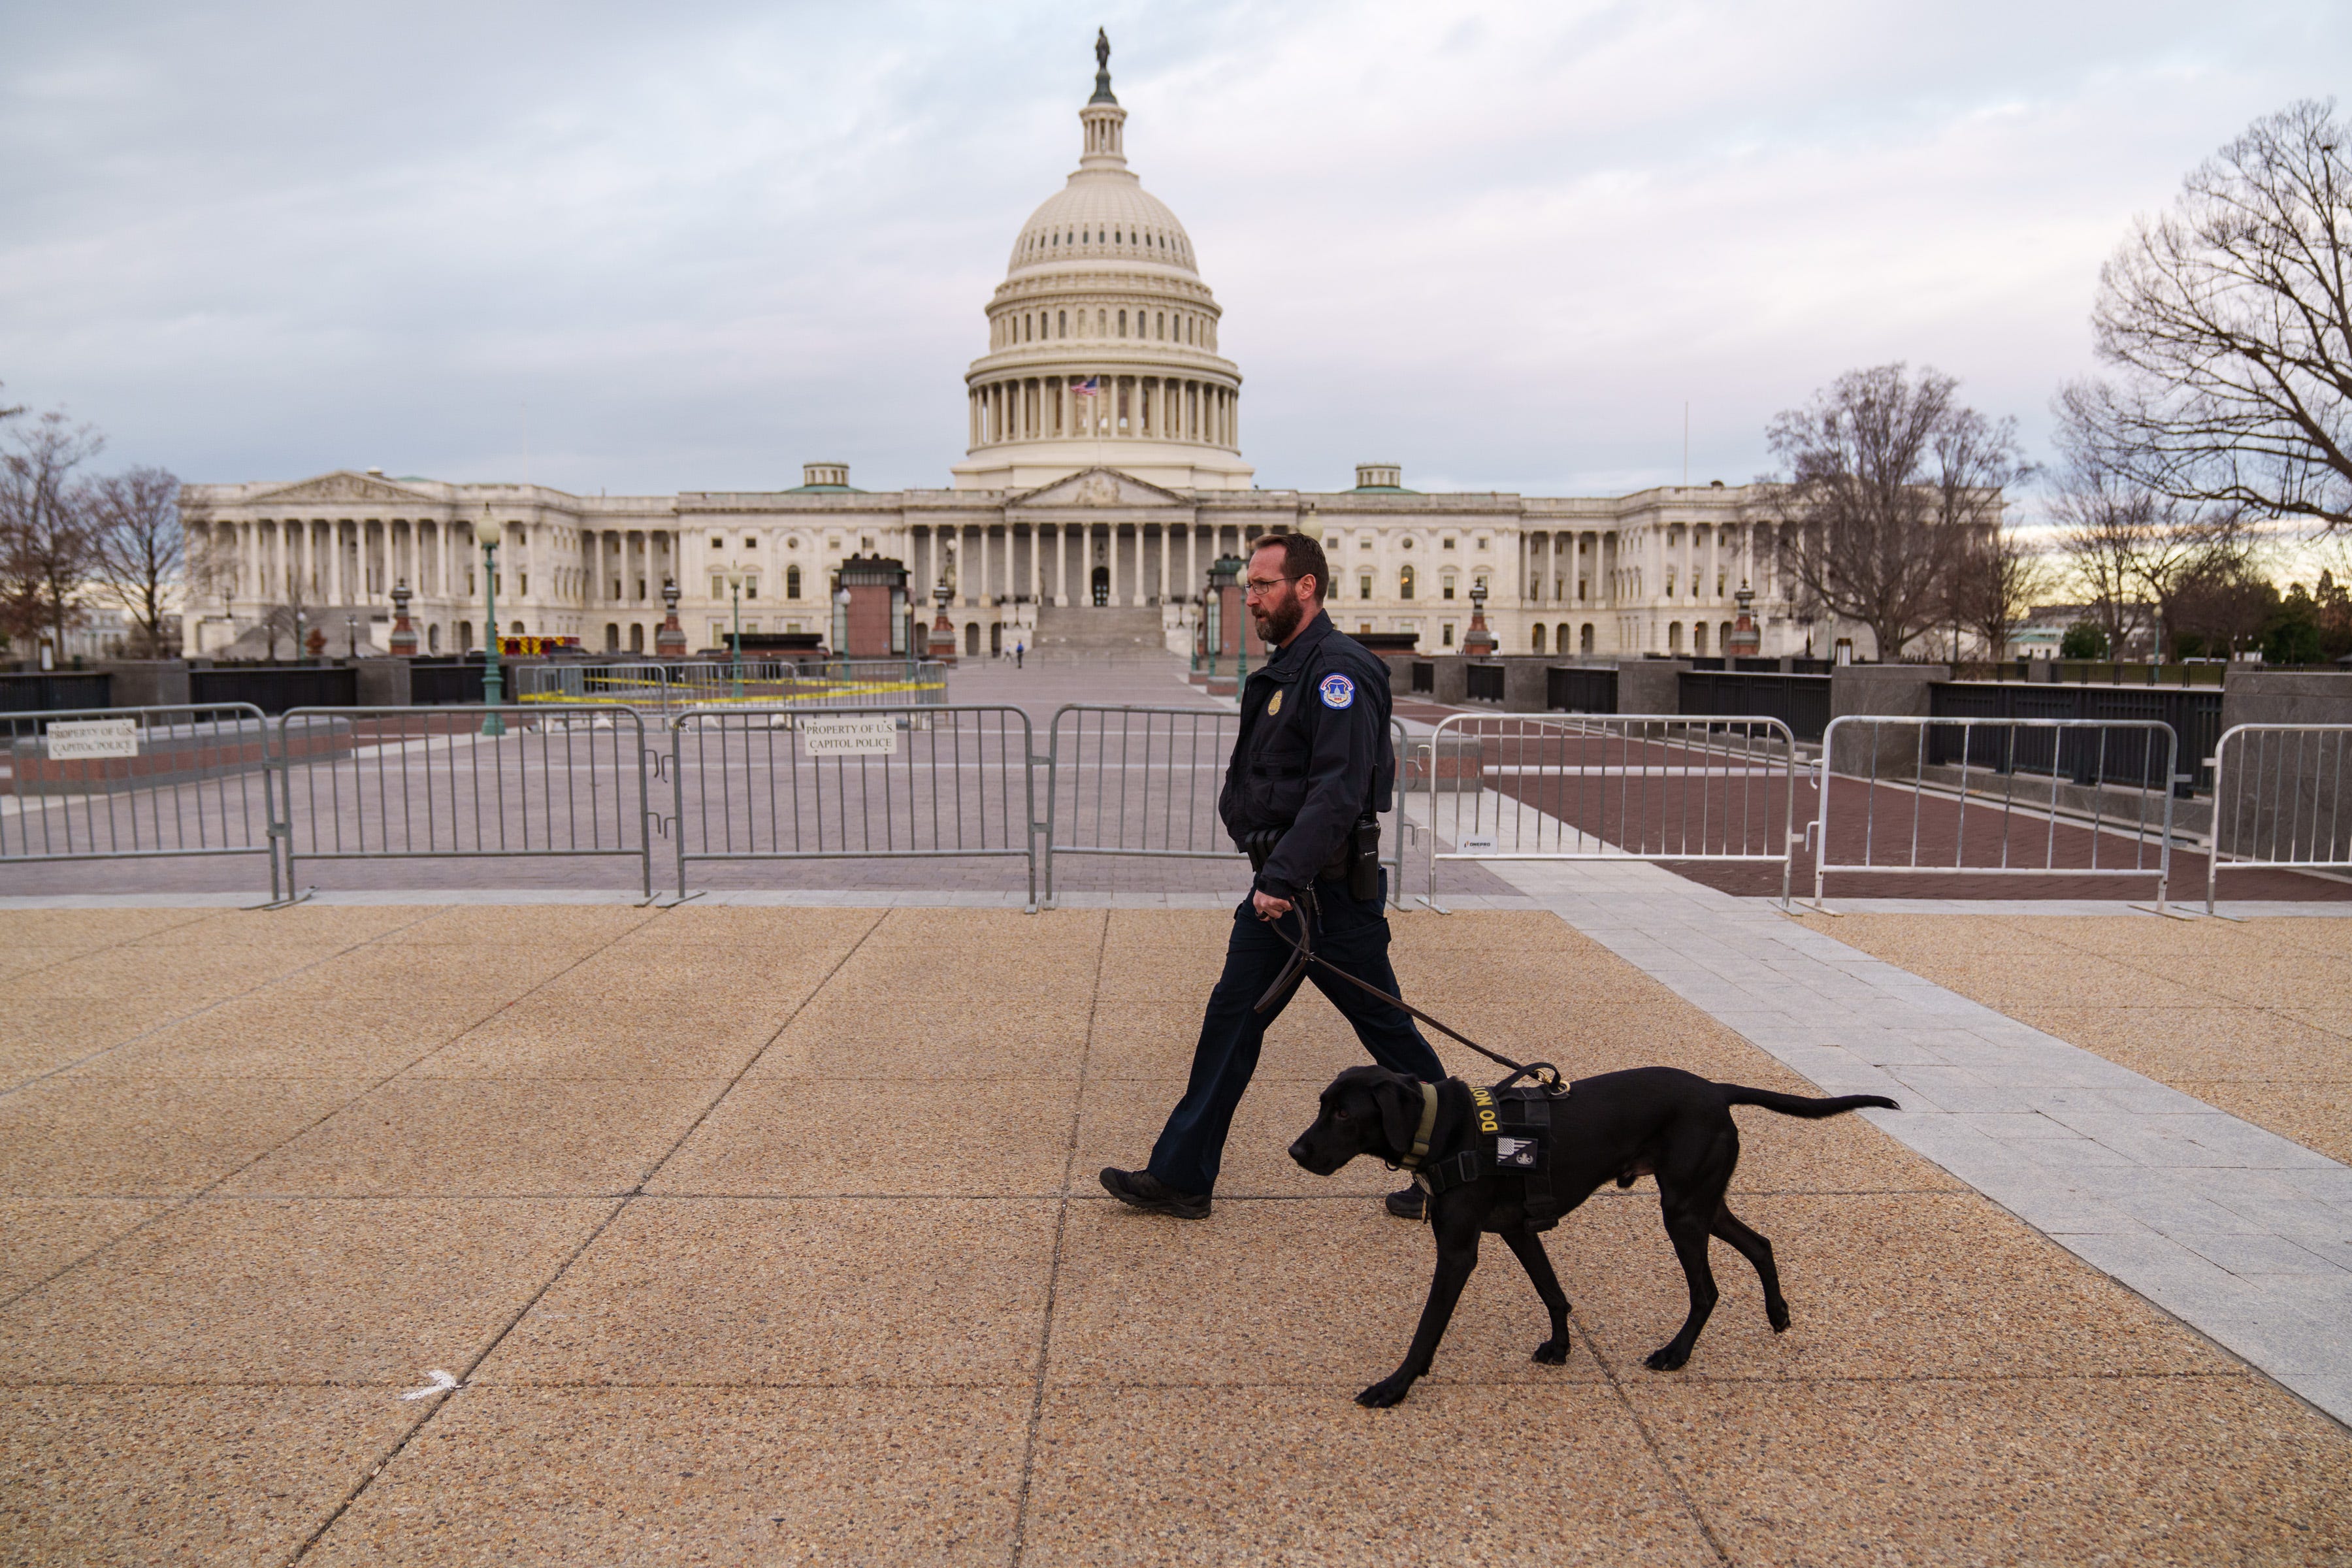 Suspected police impersonator with knives, smoke grenade arrested outside US Capitol, police say